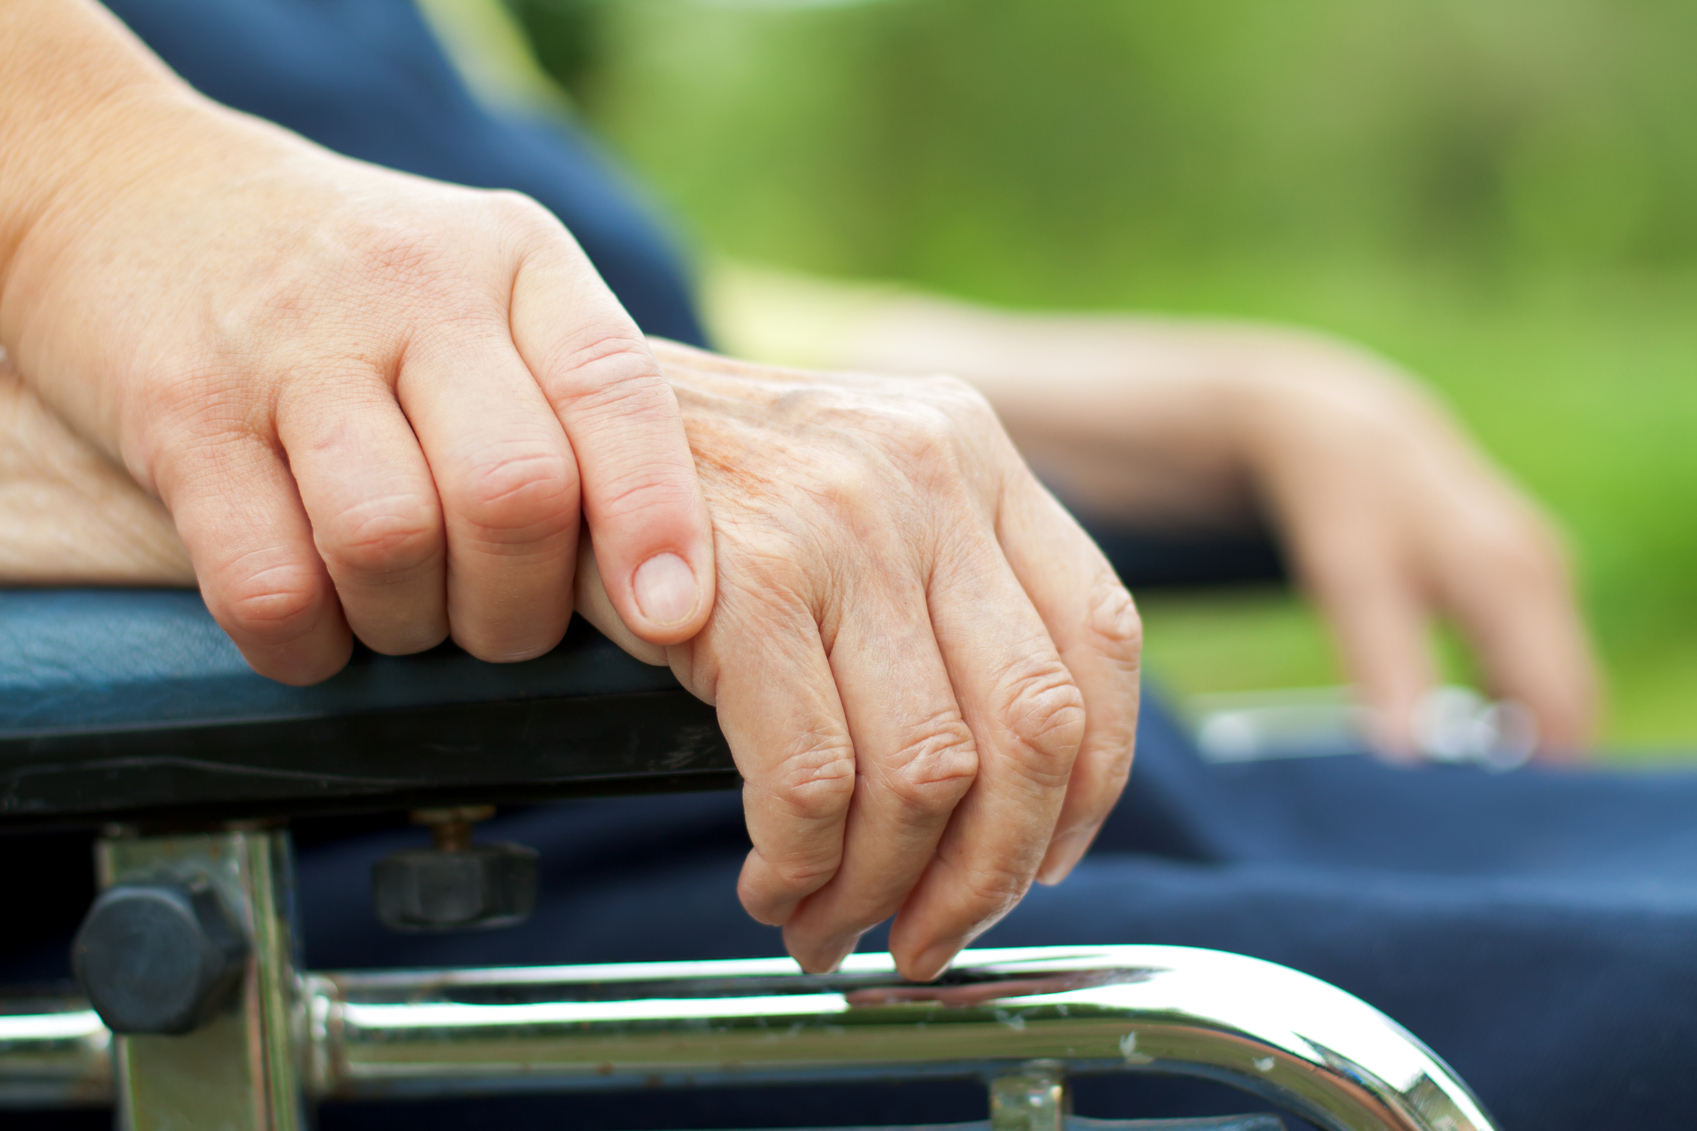 What Are Some Examples of Patient Neglect in Nursing Homes in Lexington, KY?